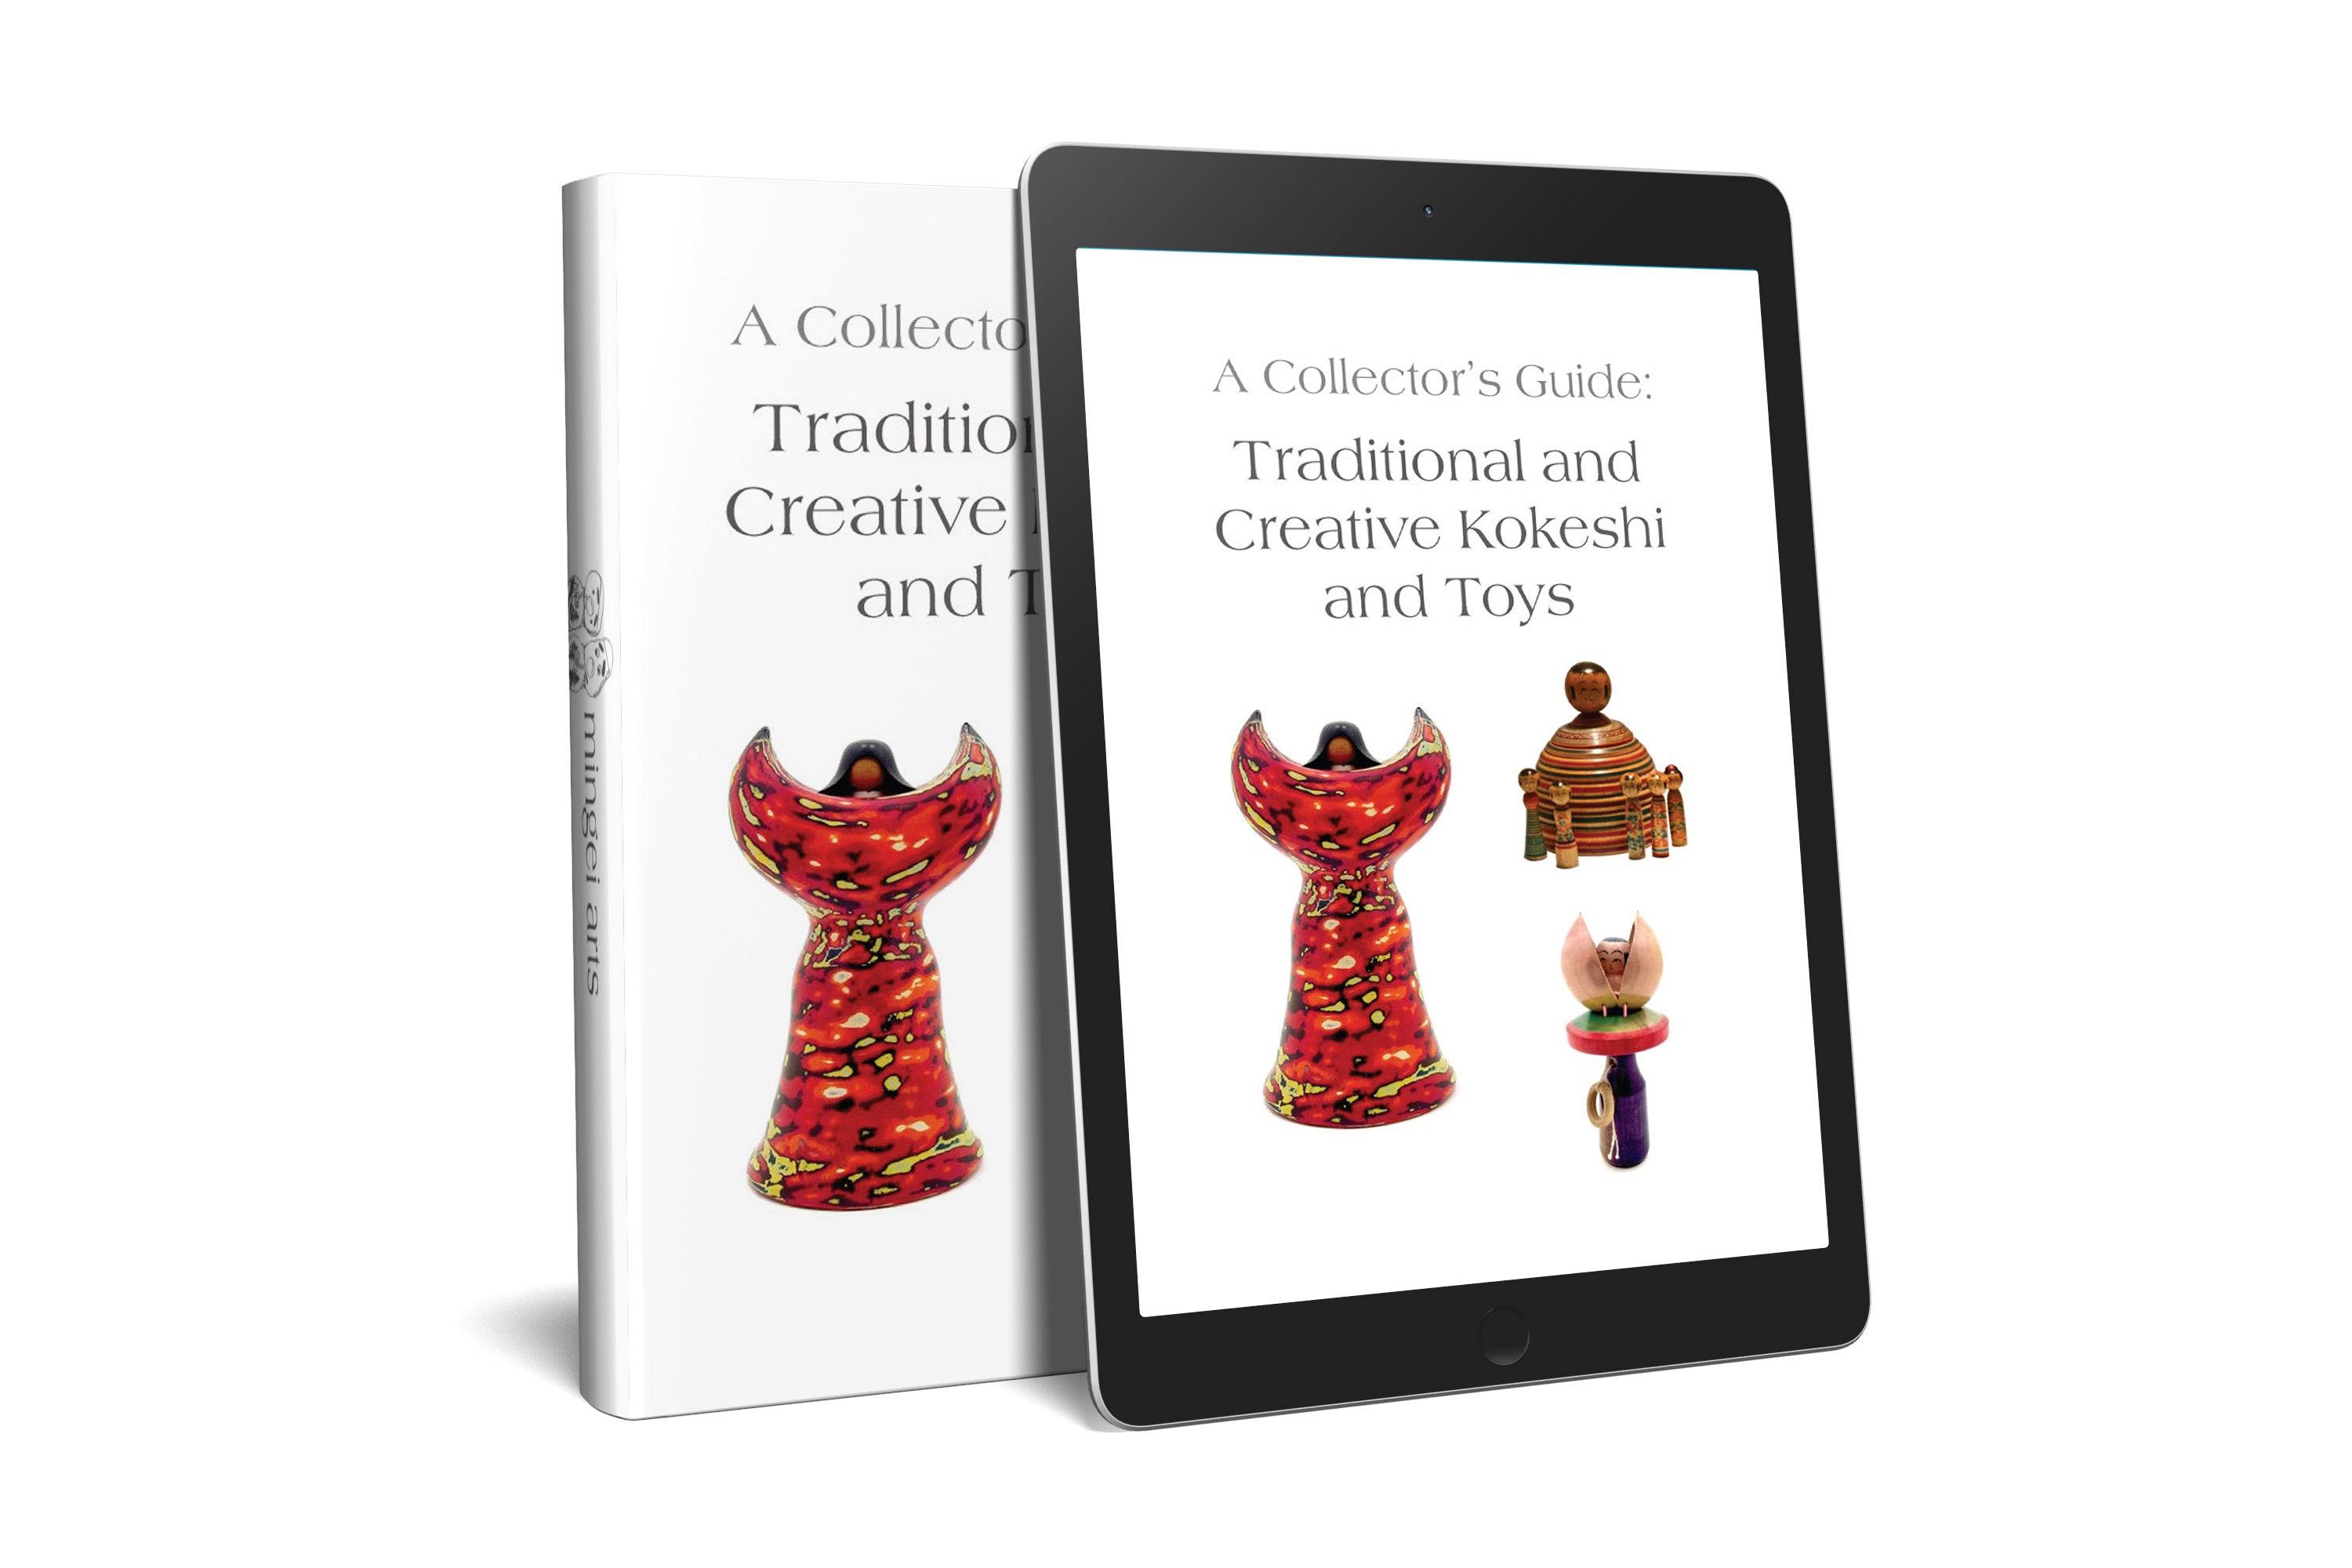 A Collector's Guide: Traditional and Creative Kokeshi and Toys